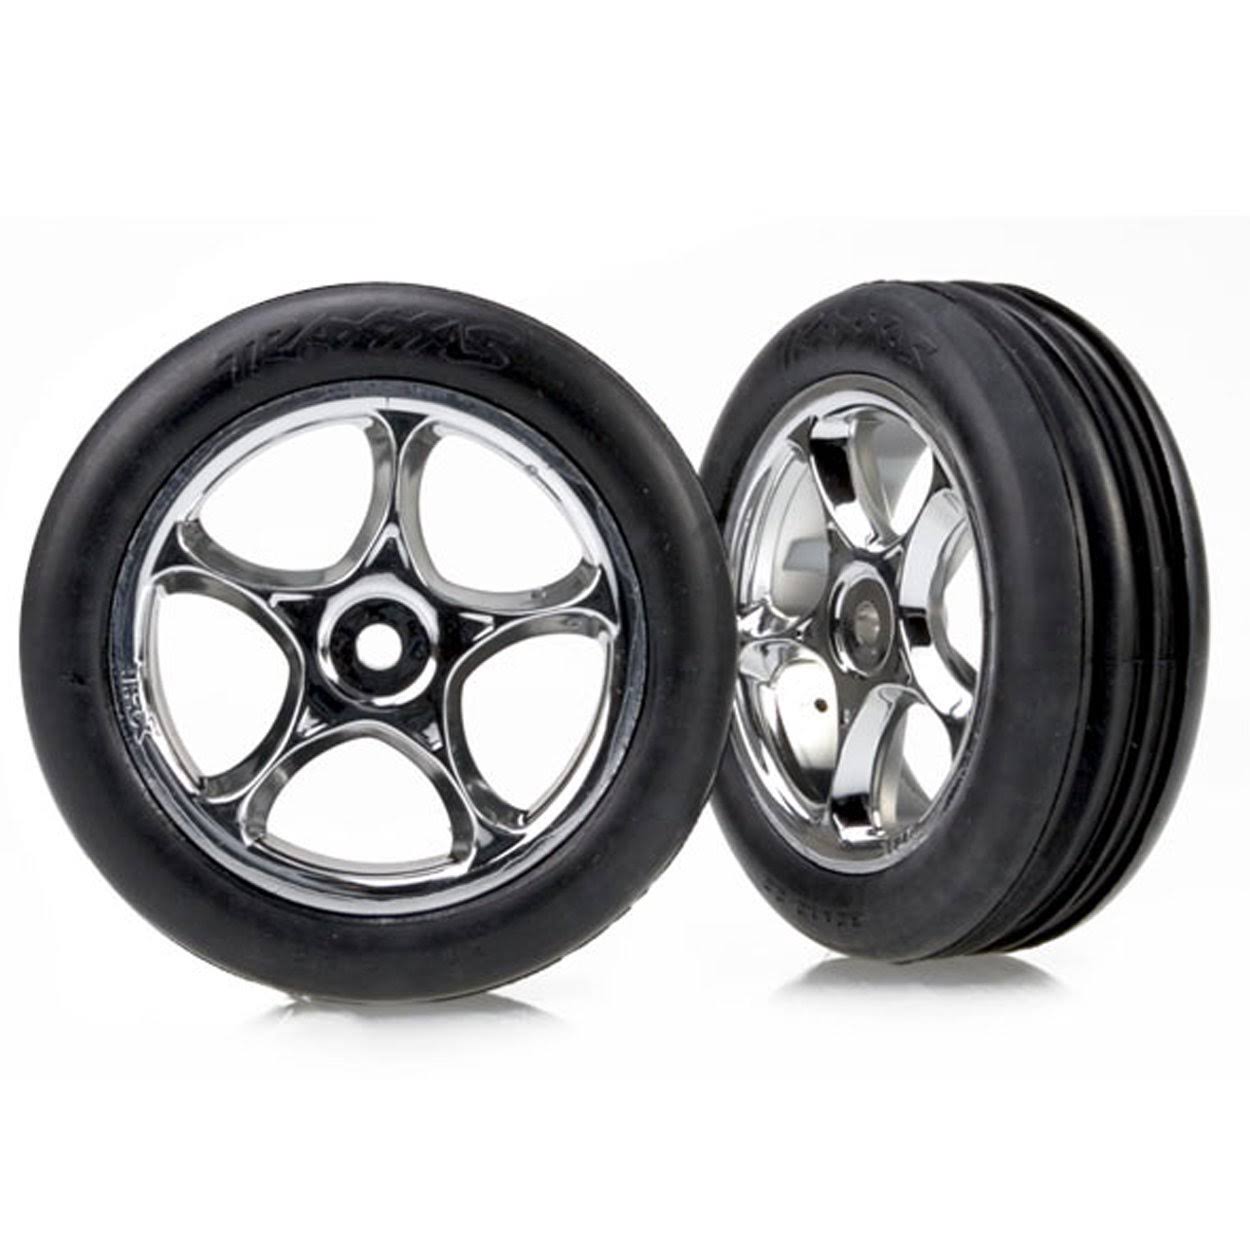 Traxxas 2471R Rc Vehicle Tracer Chrome Wheels with Alias Tires - 2.2", 2ct